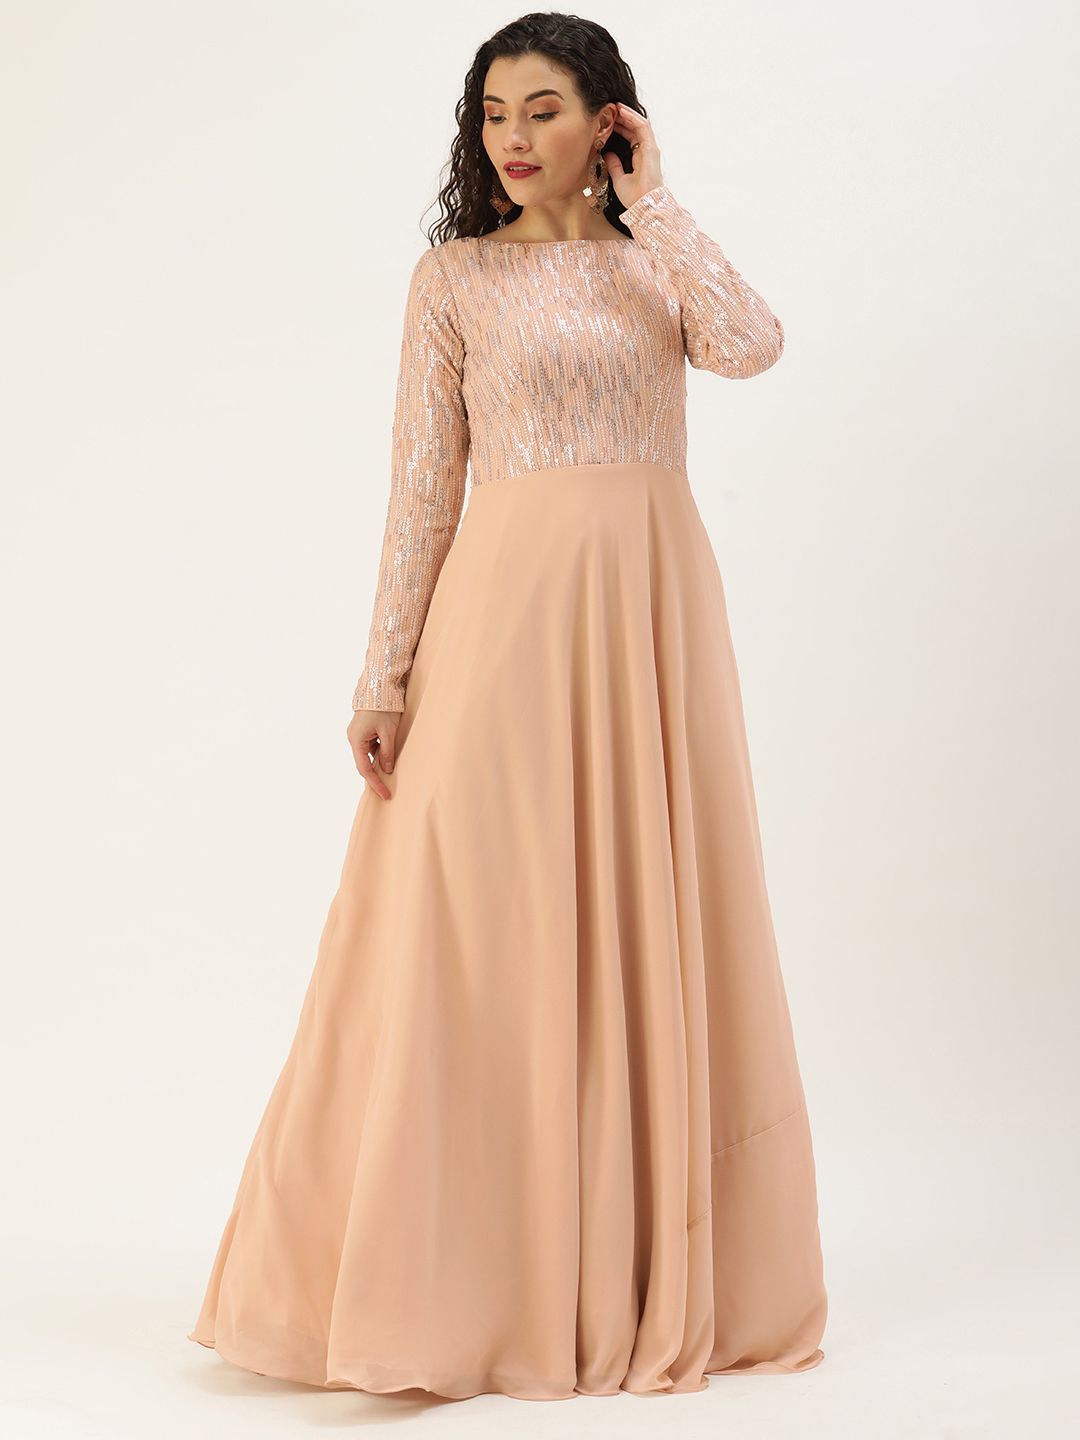 EthnoVogue Peach-Coloured Embroidered Georgette Ethnic Maxi Dress Price in India